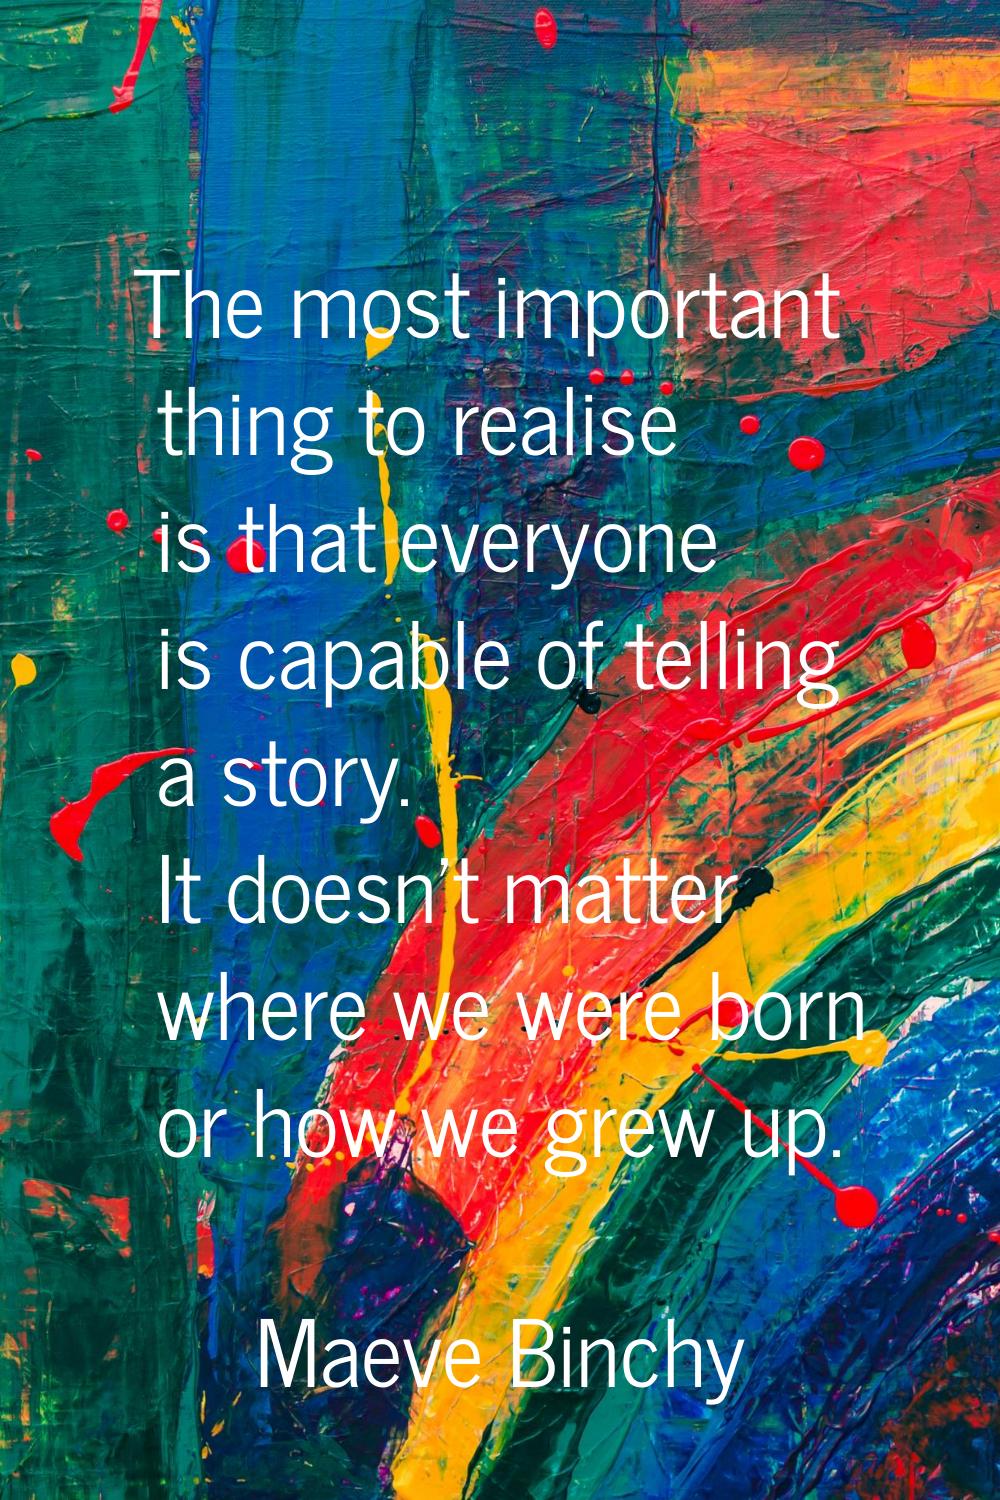 The most important thing to realise is that everyone is capable of telling a story. It doesn't matt